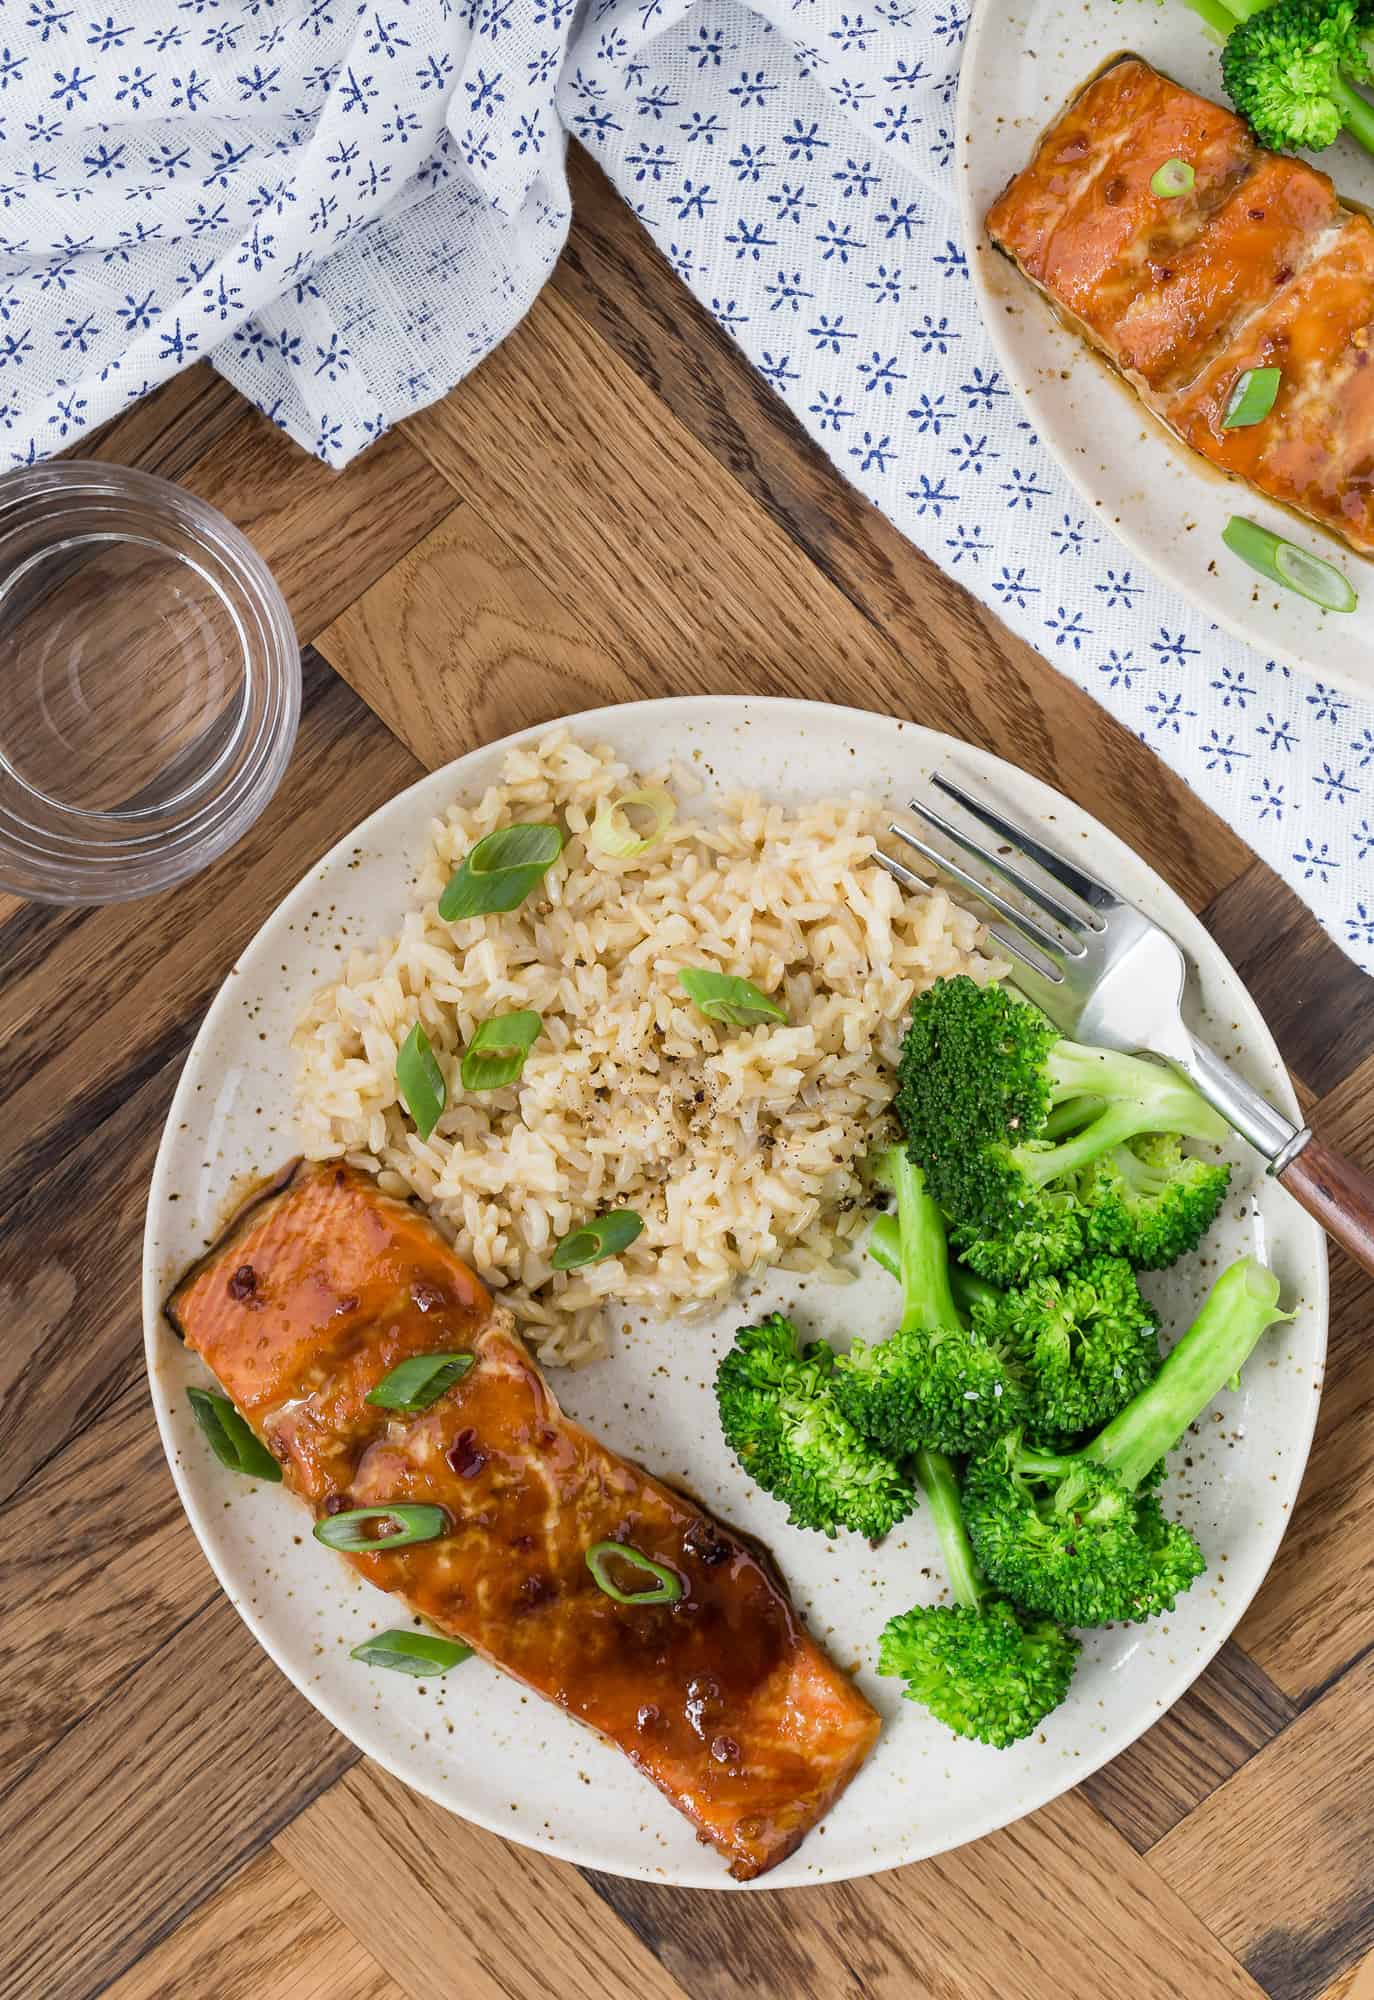 Soy and honey glazed salmon served on a plate with steamed broccoli and brown rice.